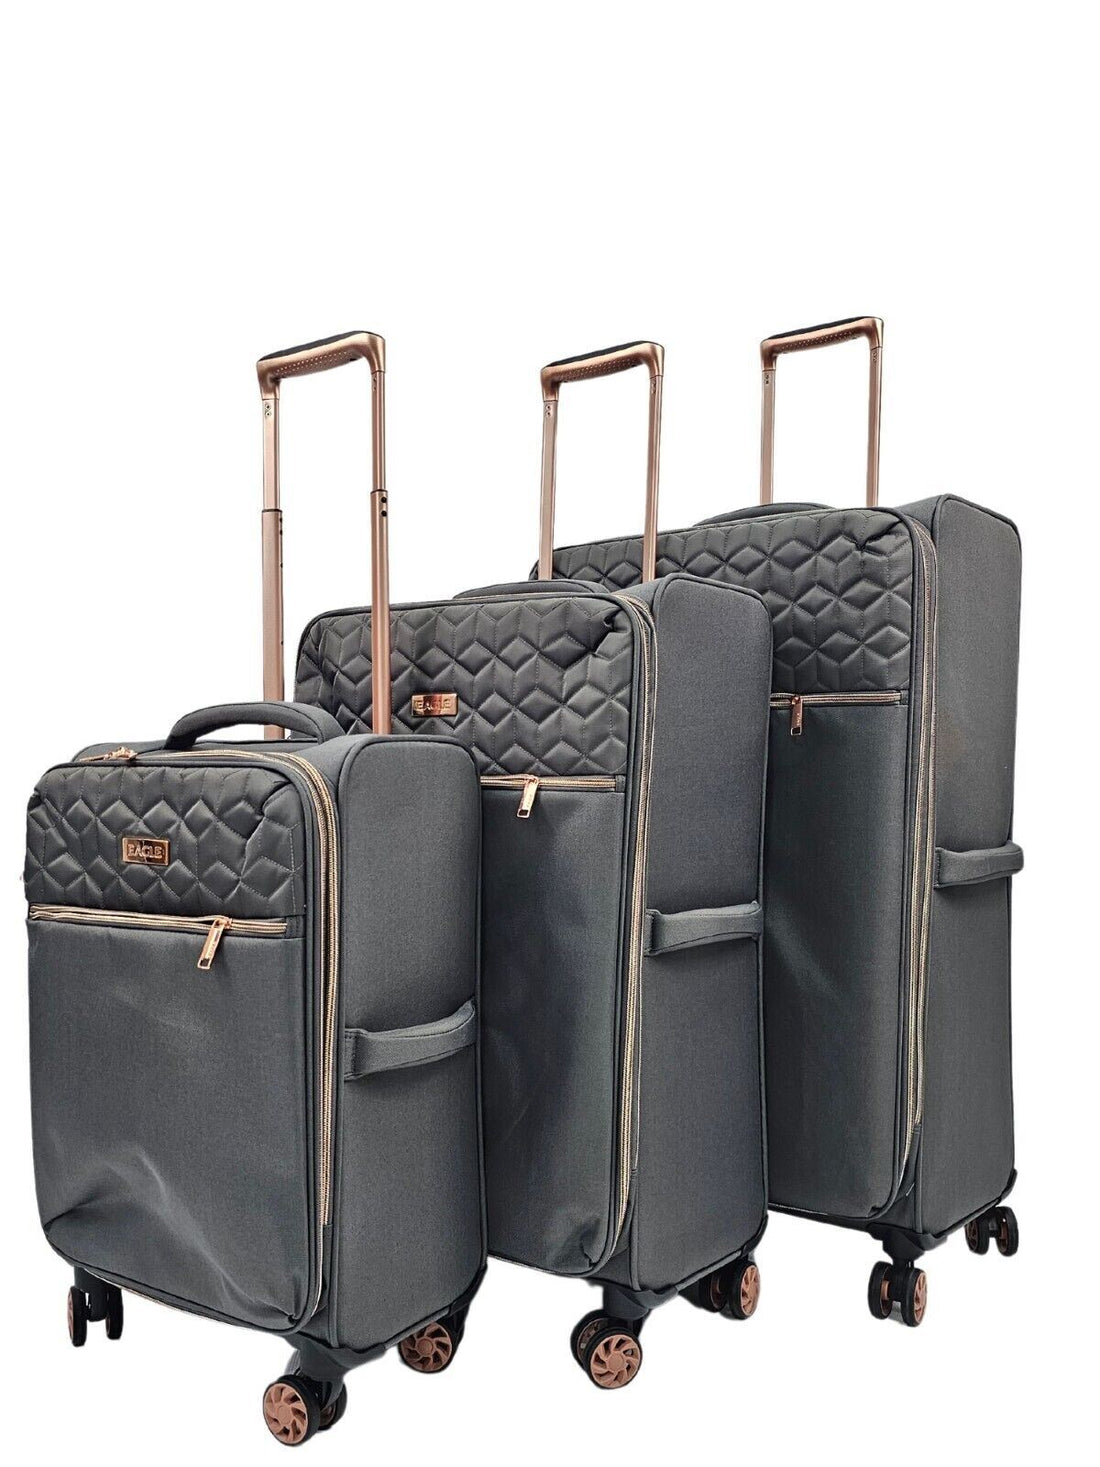 Cabin Grey Suitcases Set 4 Wheel Luggage Travel Lightweight Bags - Upperclass Fashions 